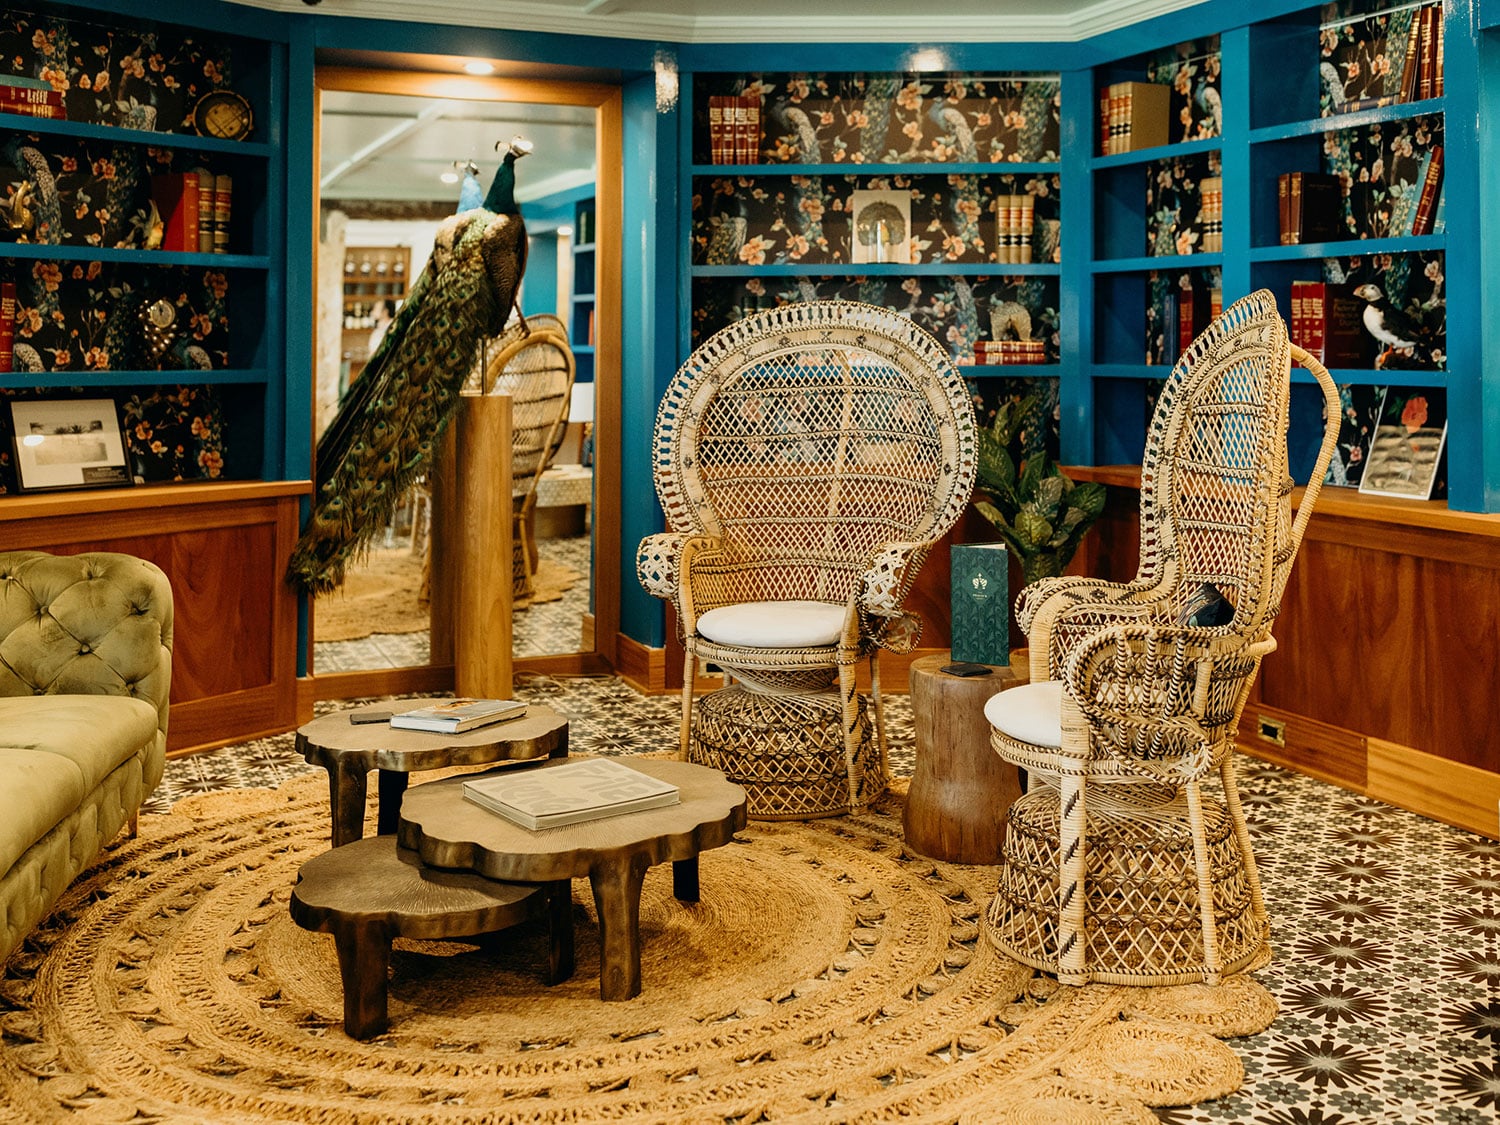 The interior of the Peacock Room at the King Christian Hotel in the Caribbean island of St. Croix, U.S. Virgin Islands.